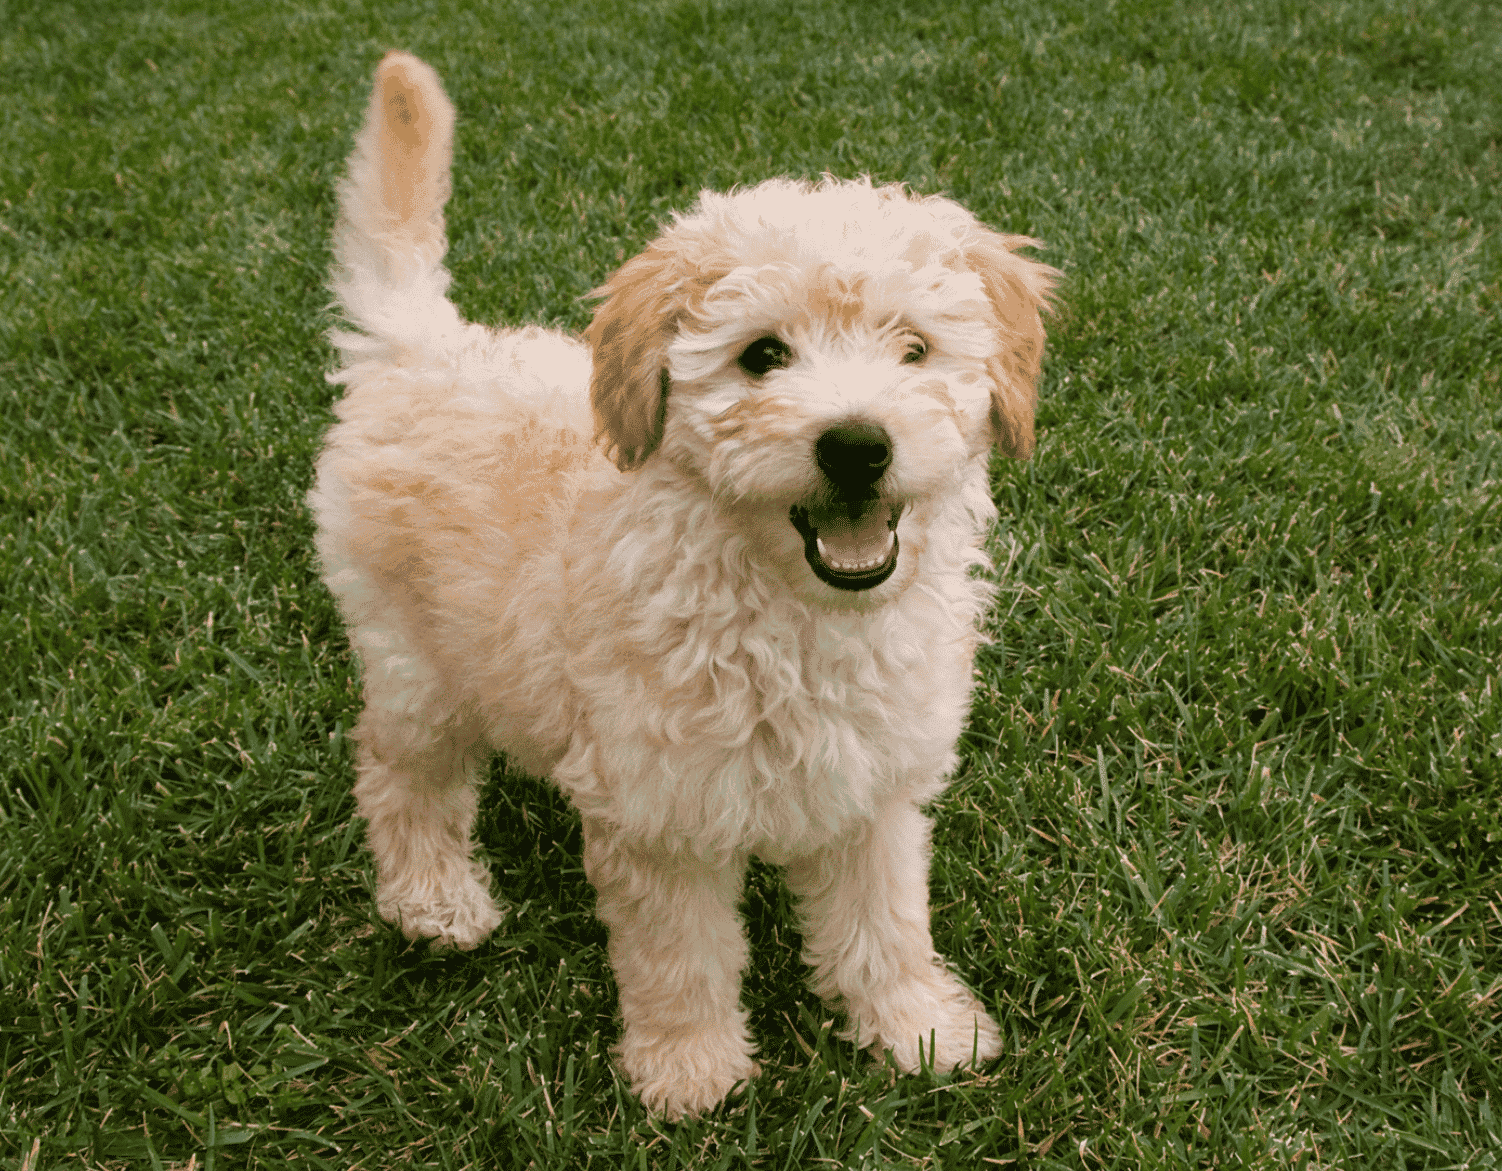 Goldendoodle: Is The Golden Retriever Poodle Mix Best for You?